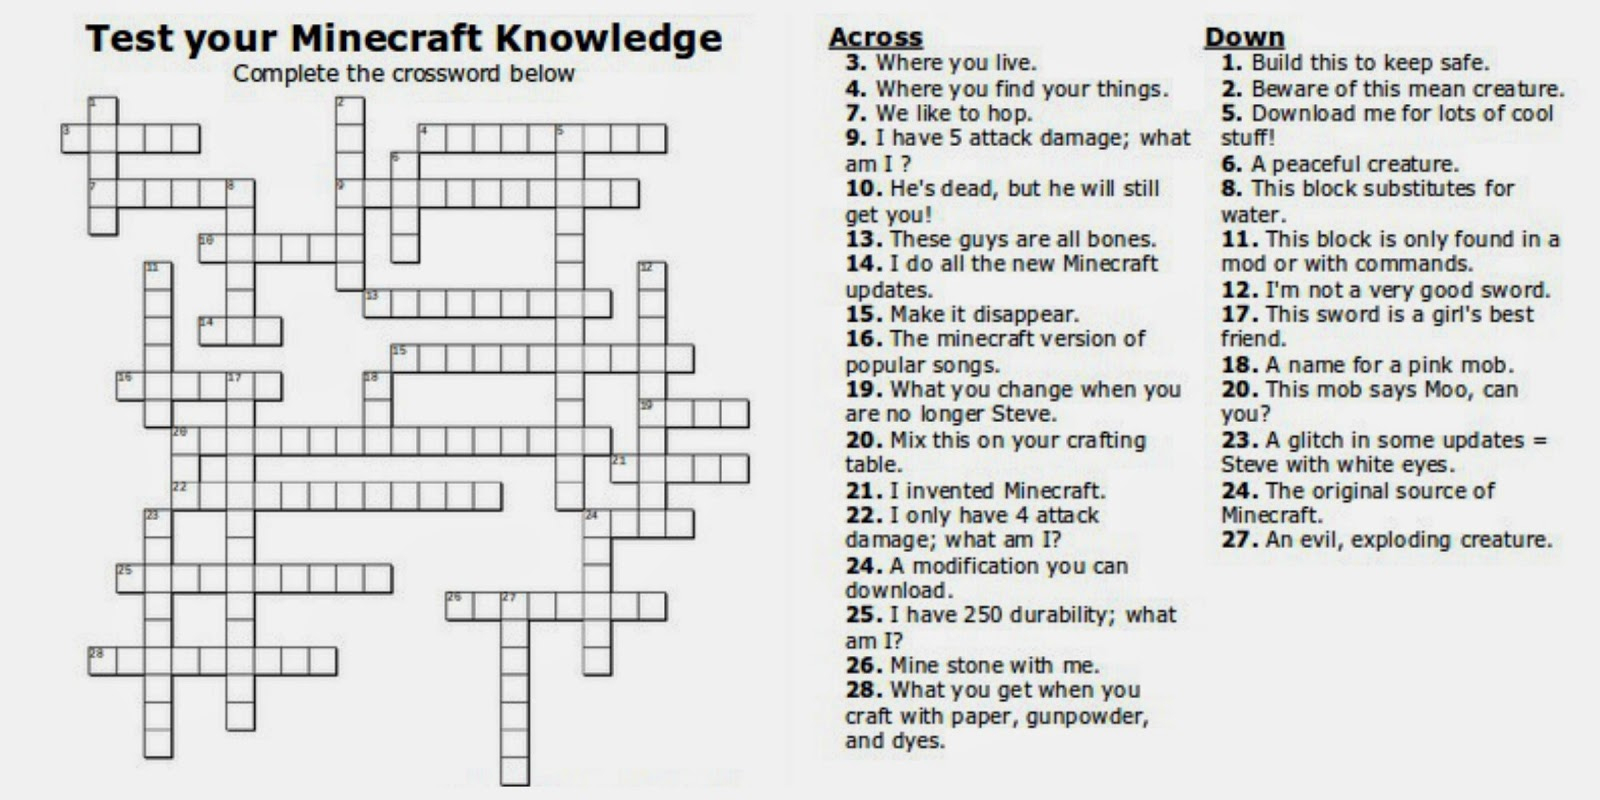 Free Printable Minecraft Crossword Search: Test Your Minecraft - Make Your Own Crossword Puzzle Free Printable